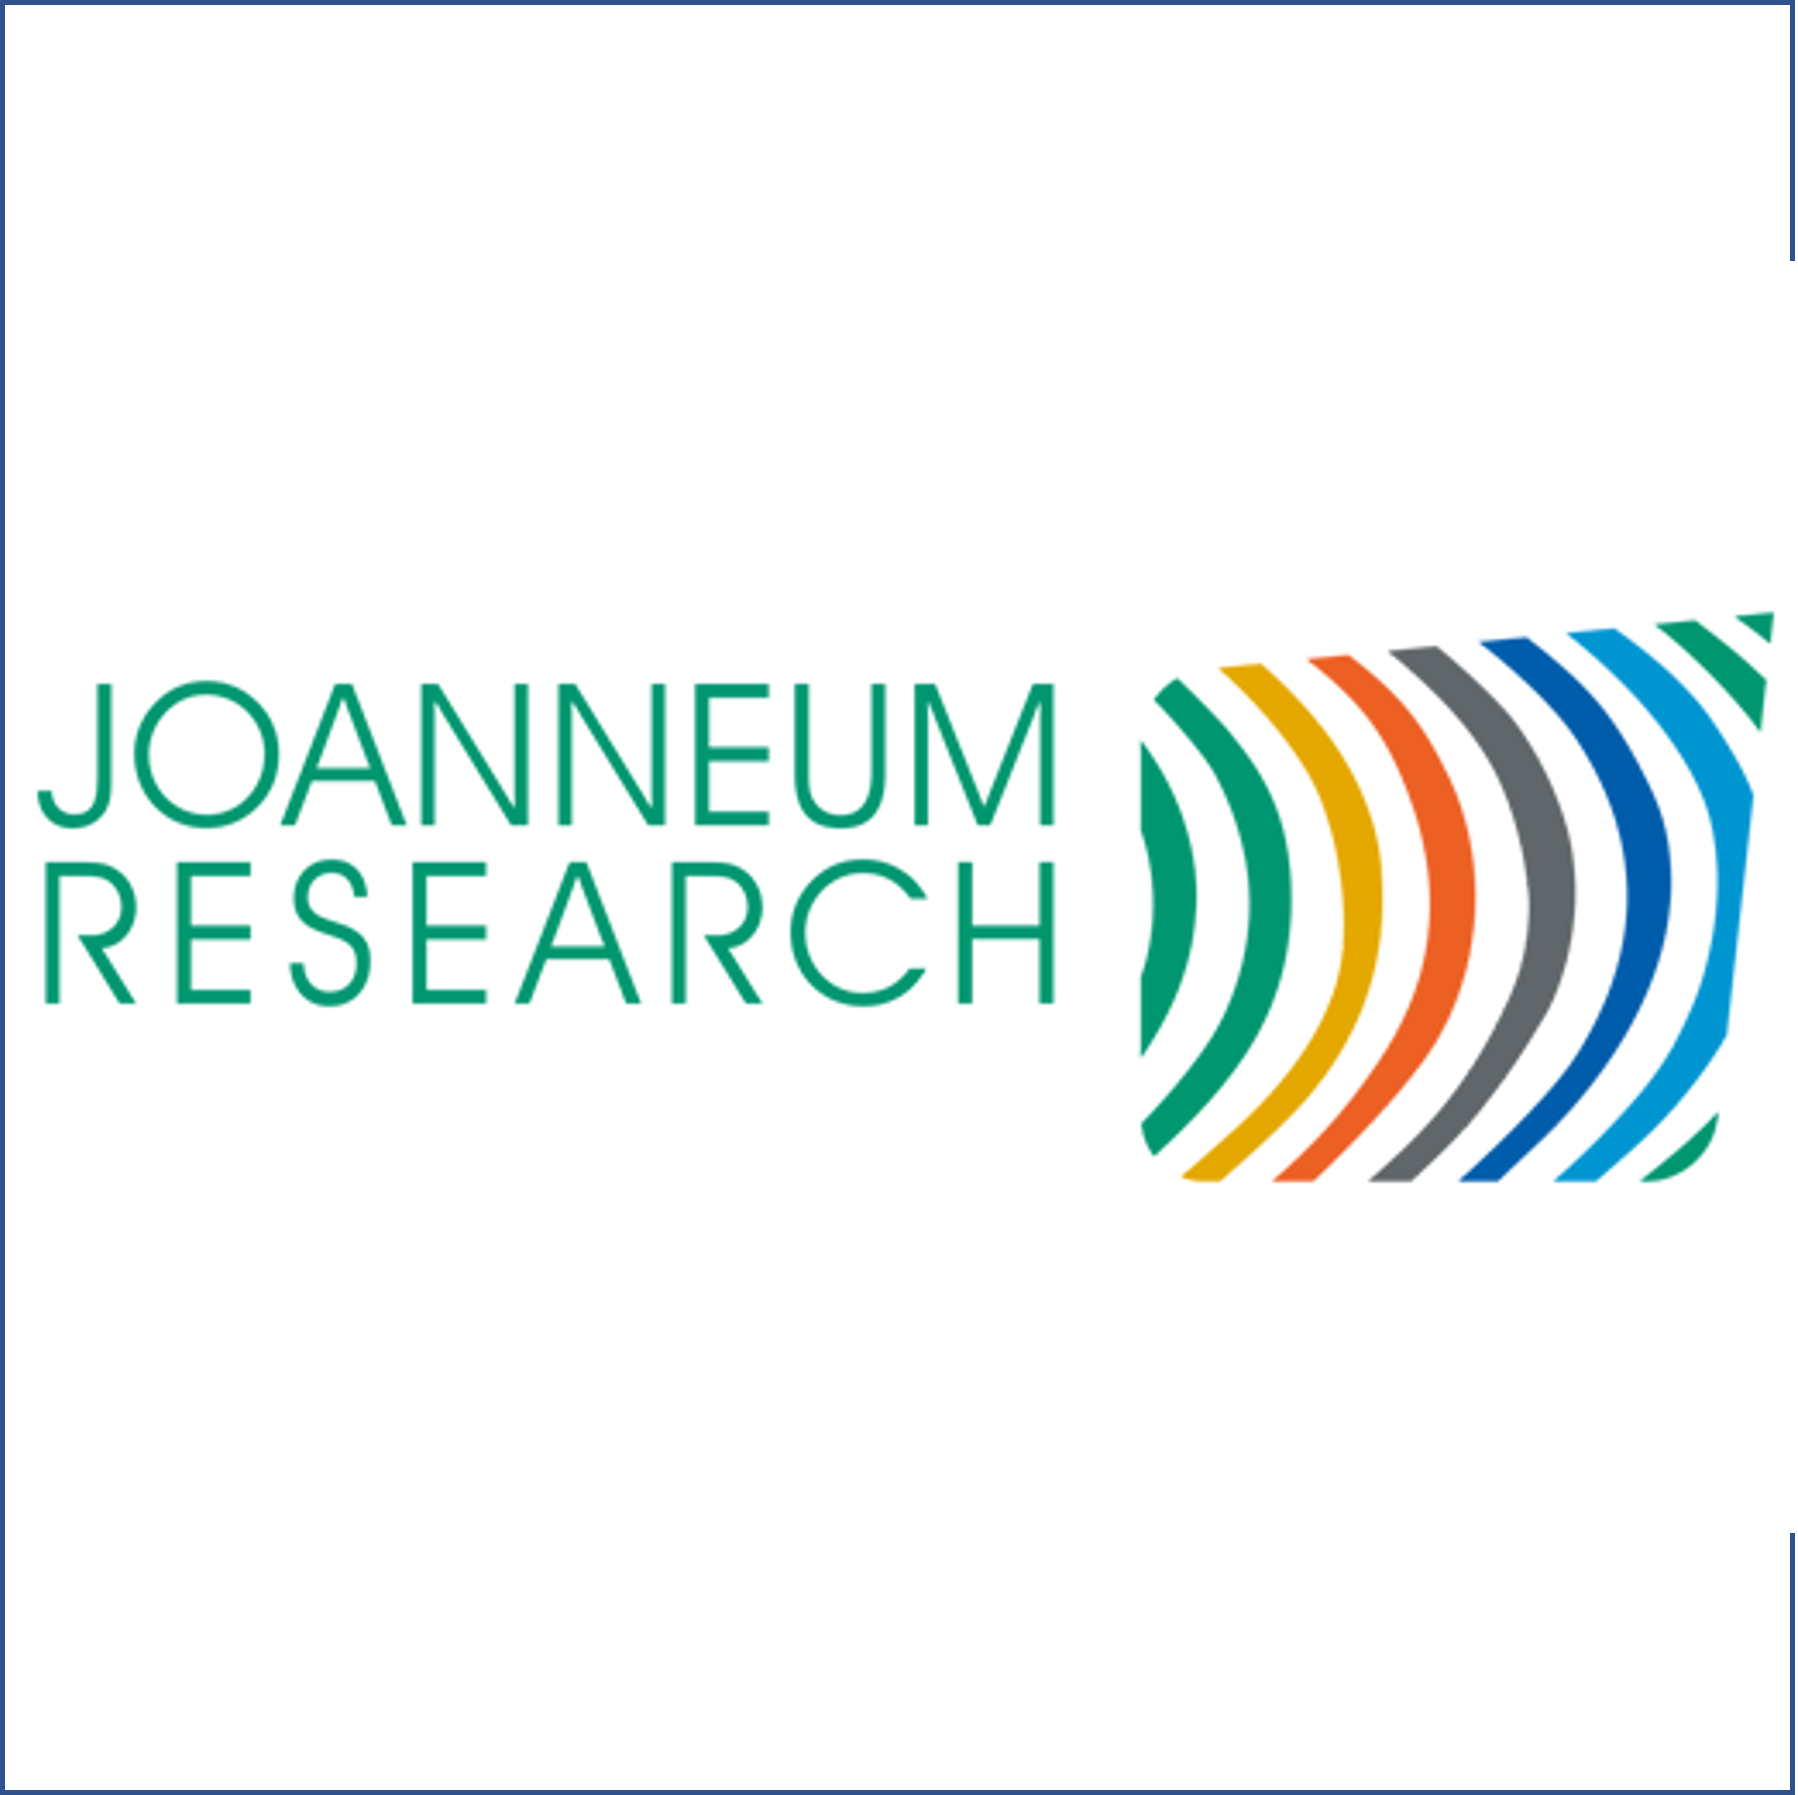 Joaneum Reasearch